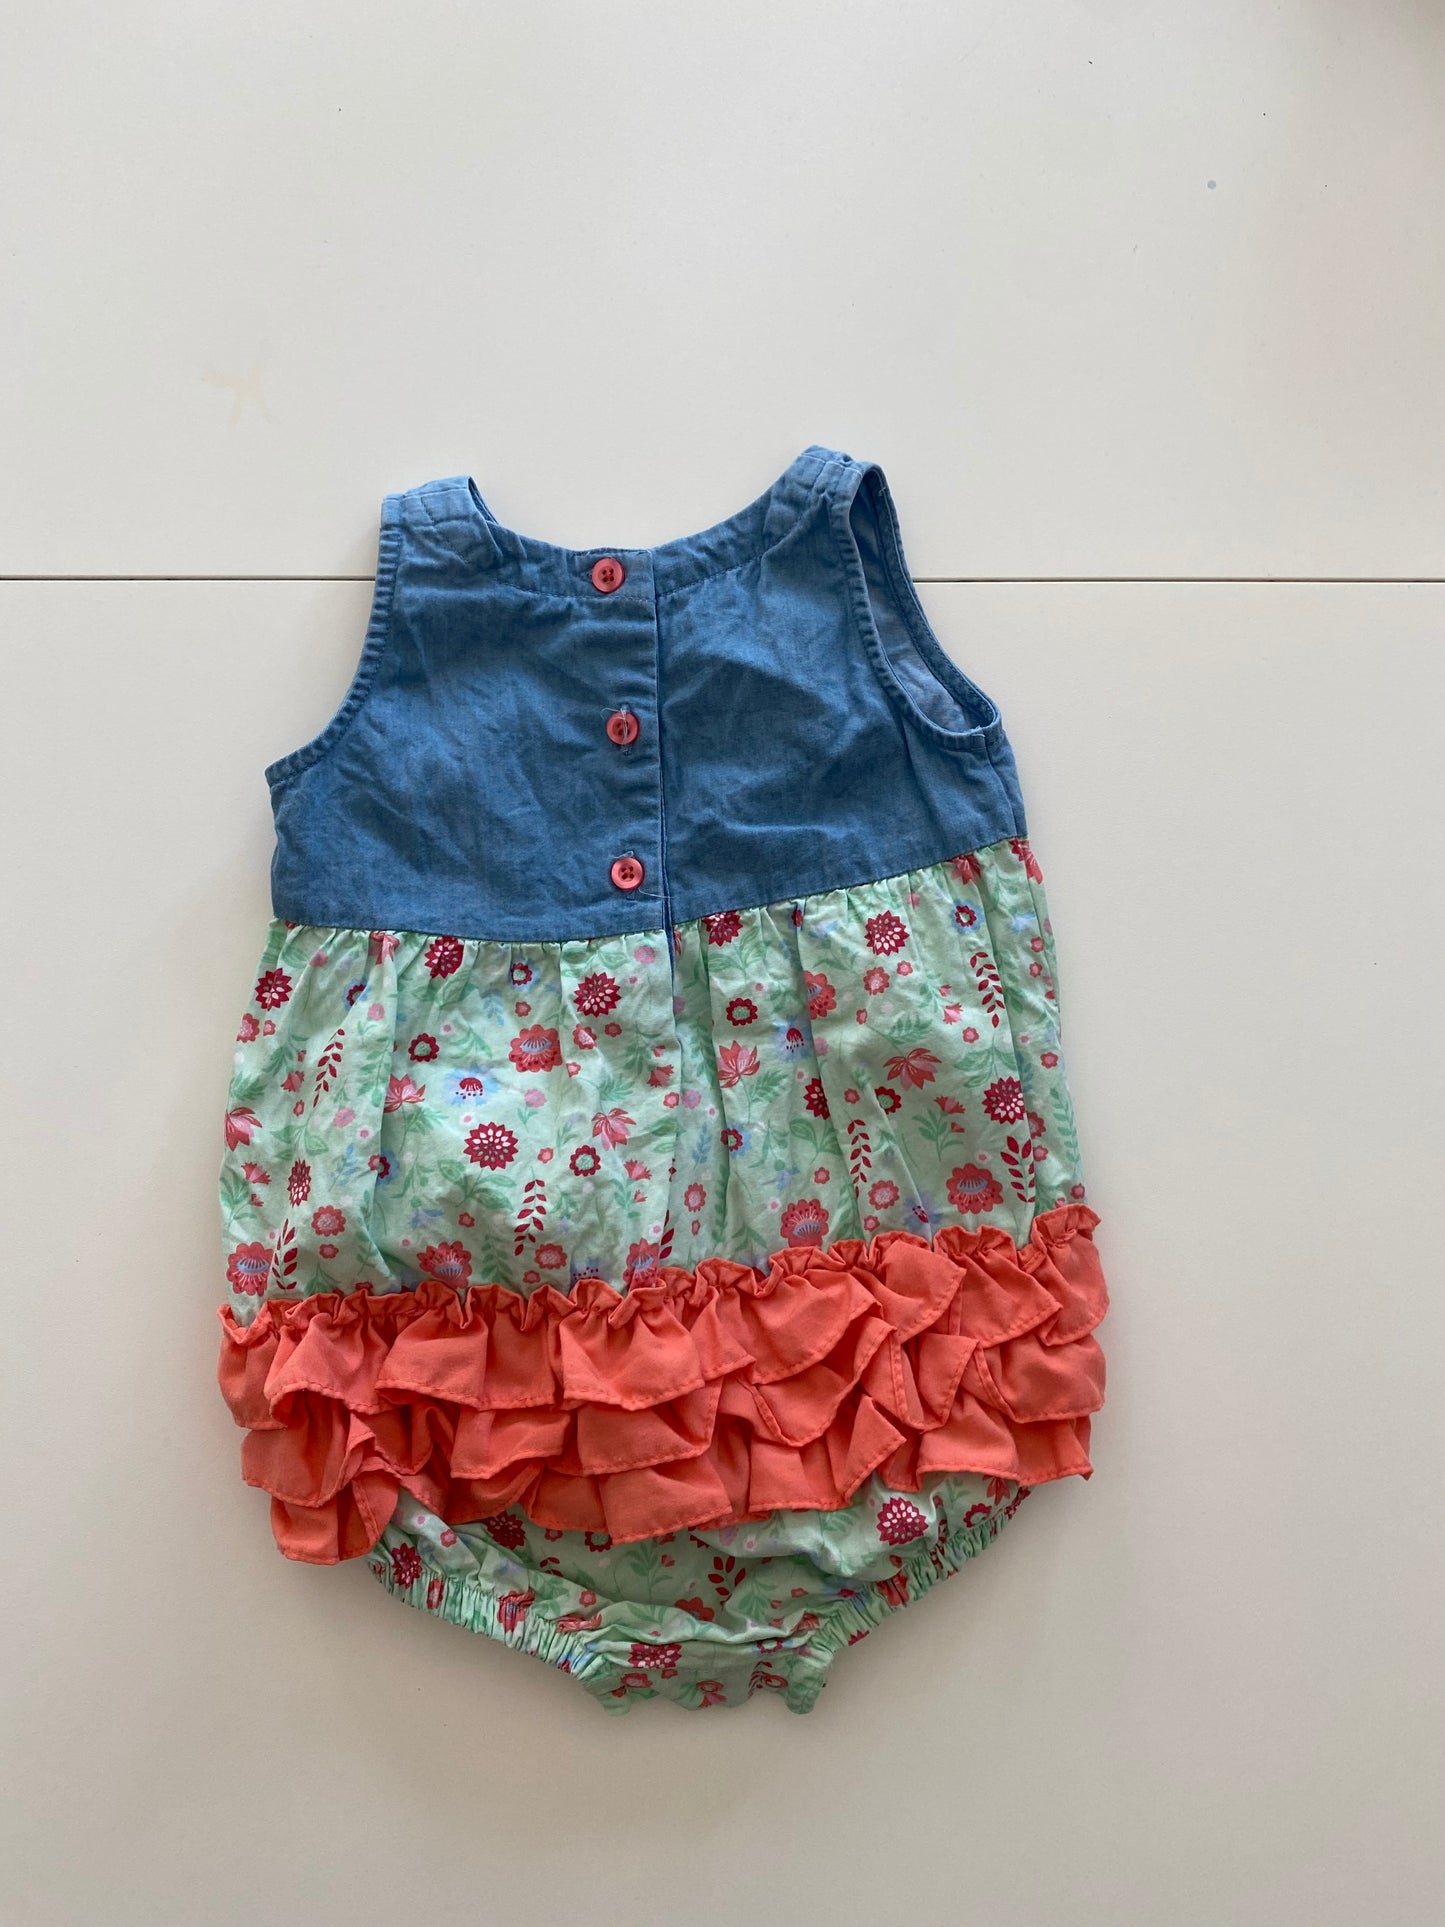 Ruffle Butts denim floral romper with pink ruffles Girls 18-24M